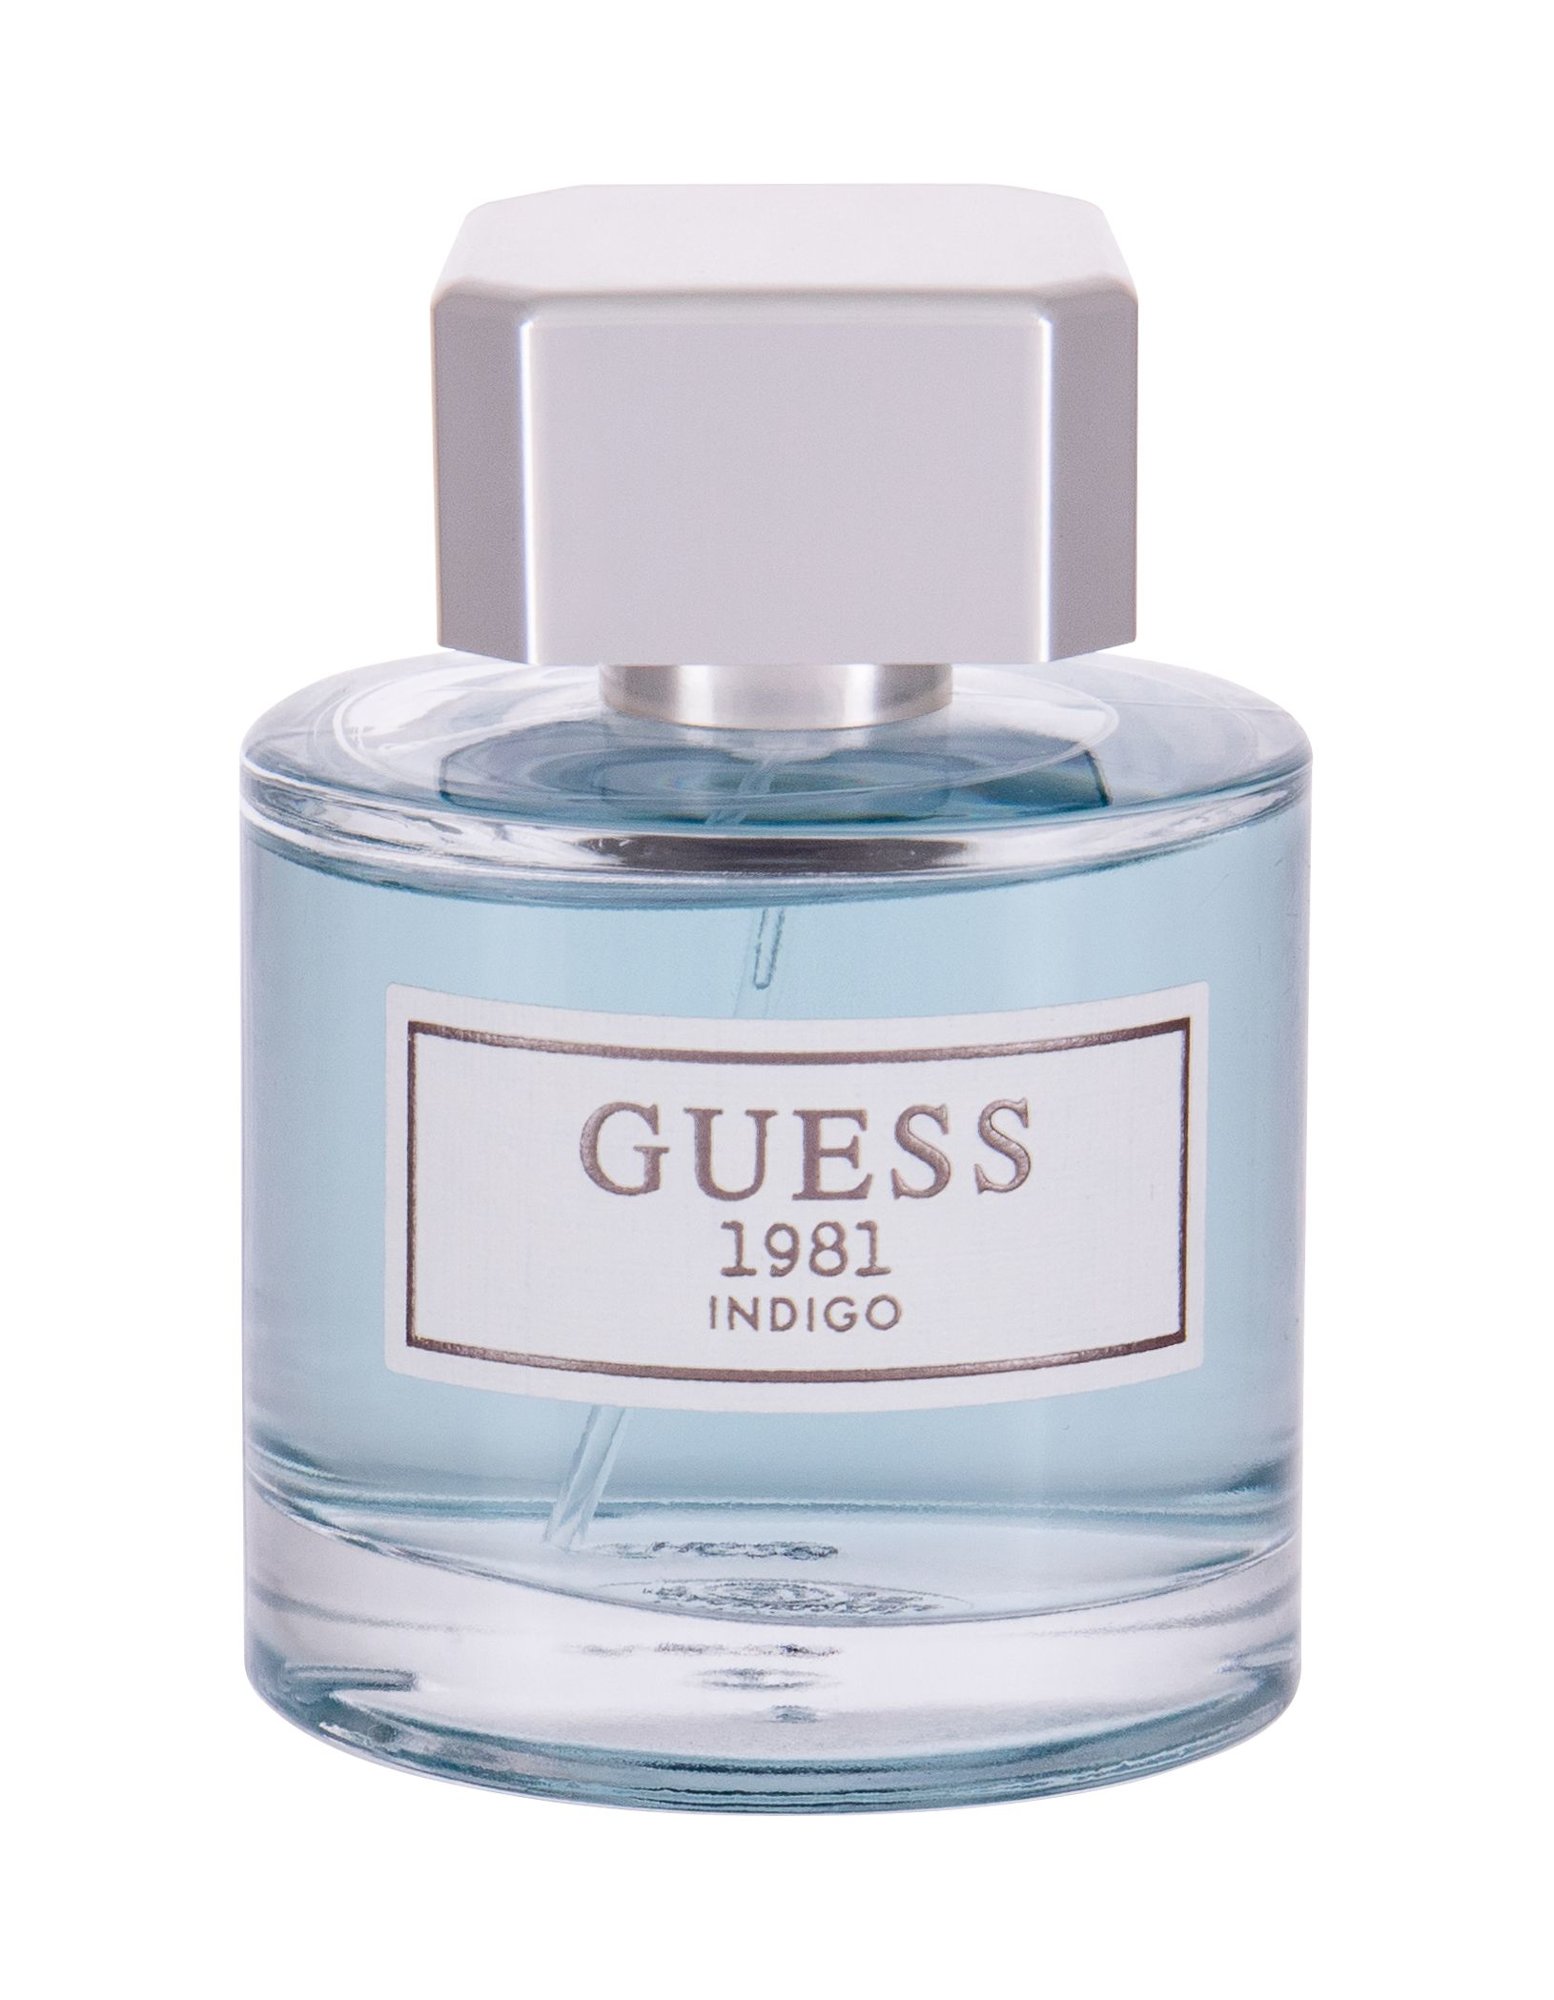 GUESS Guess 1981